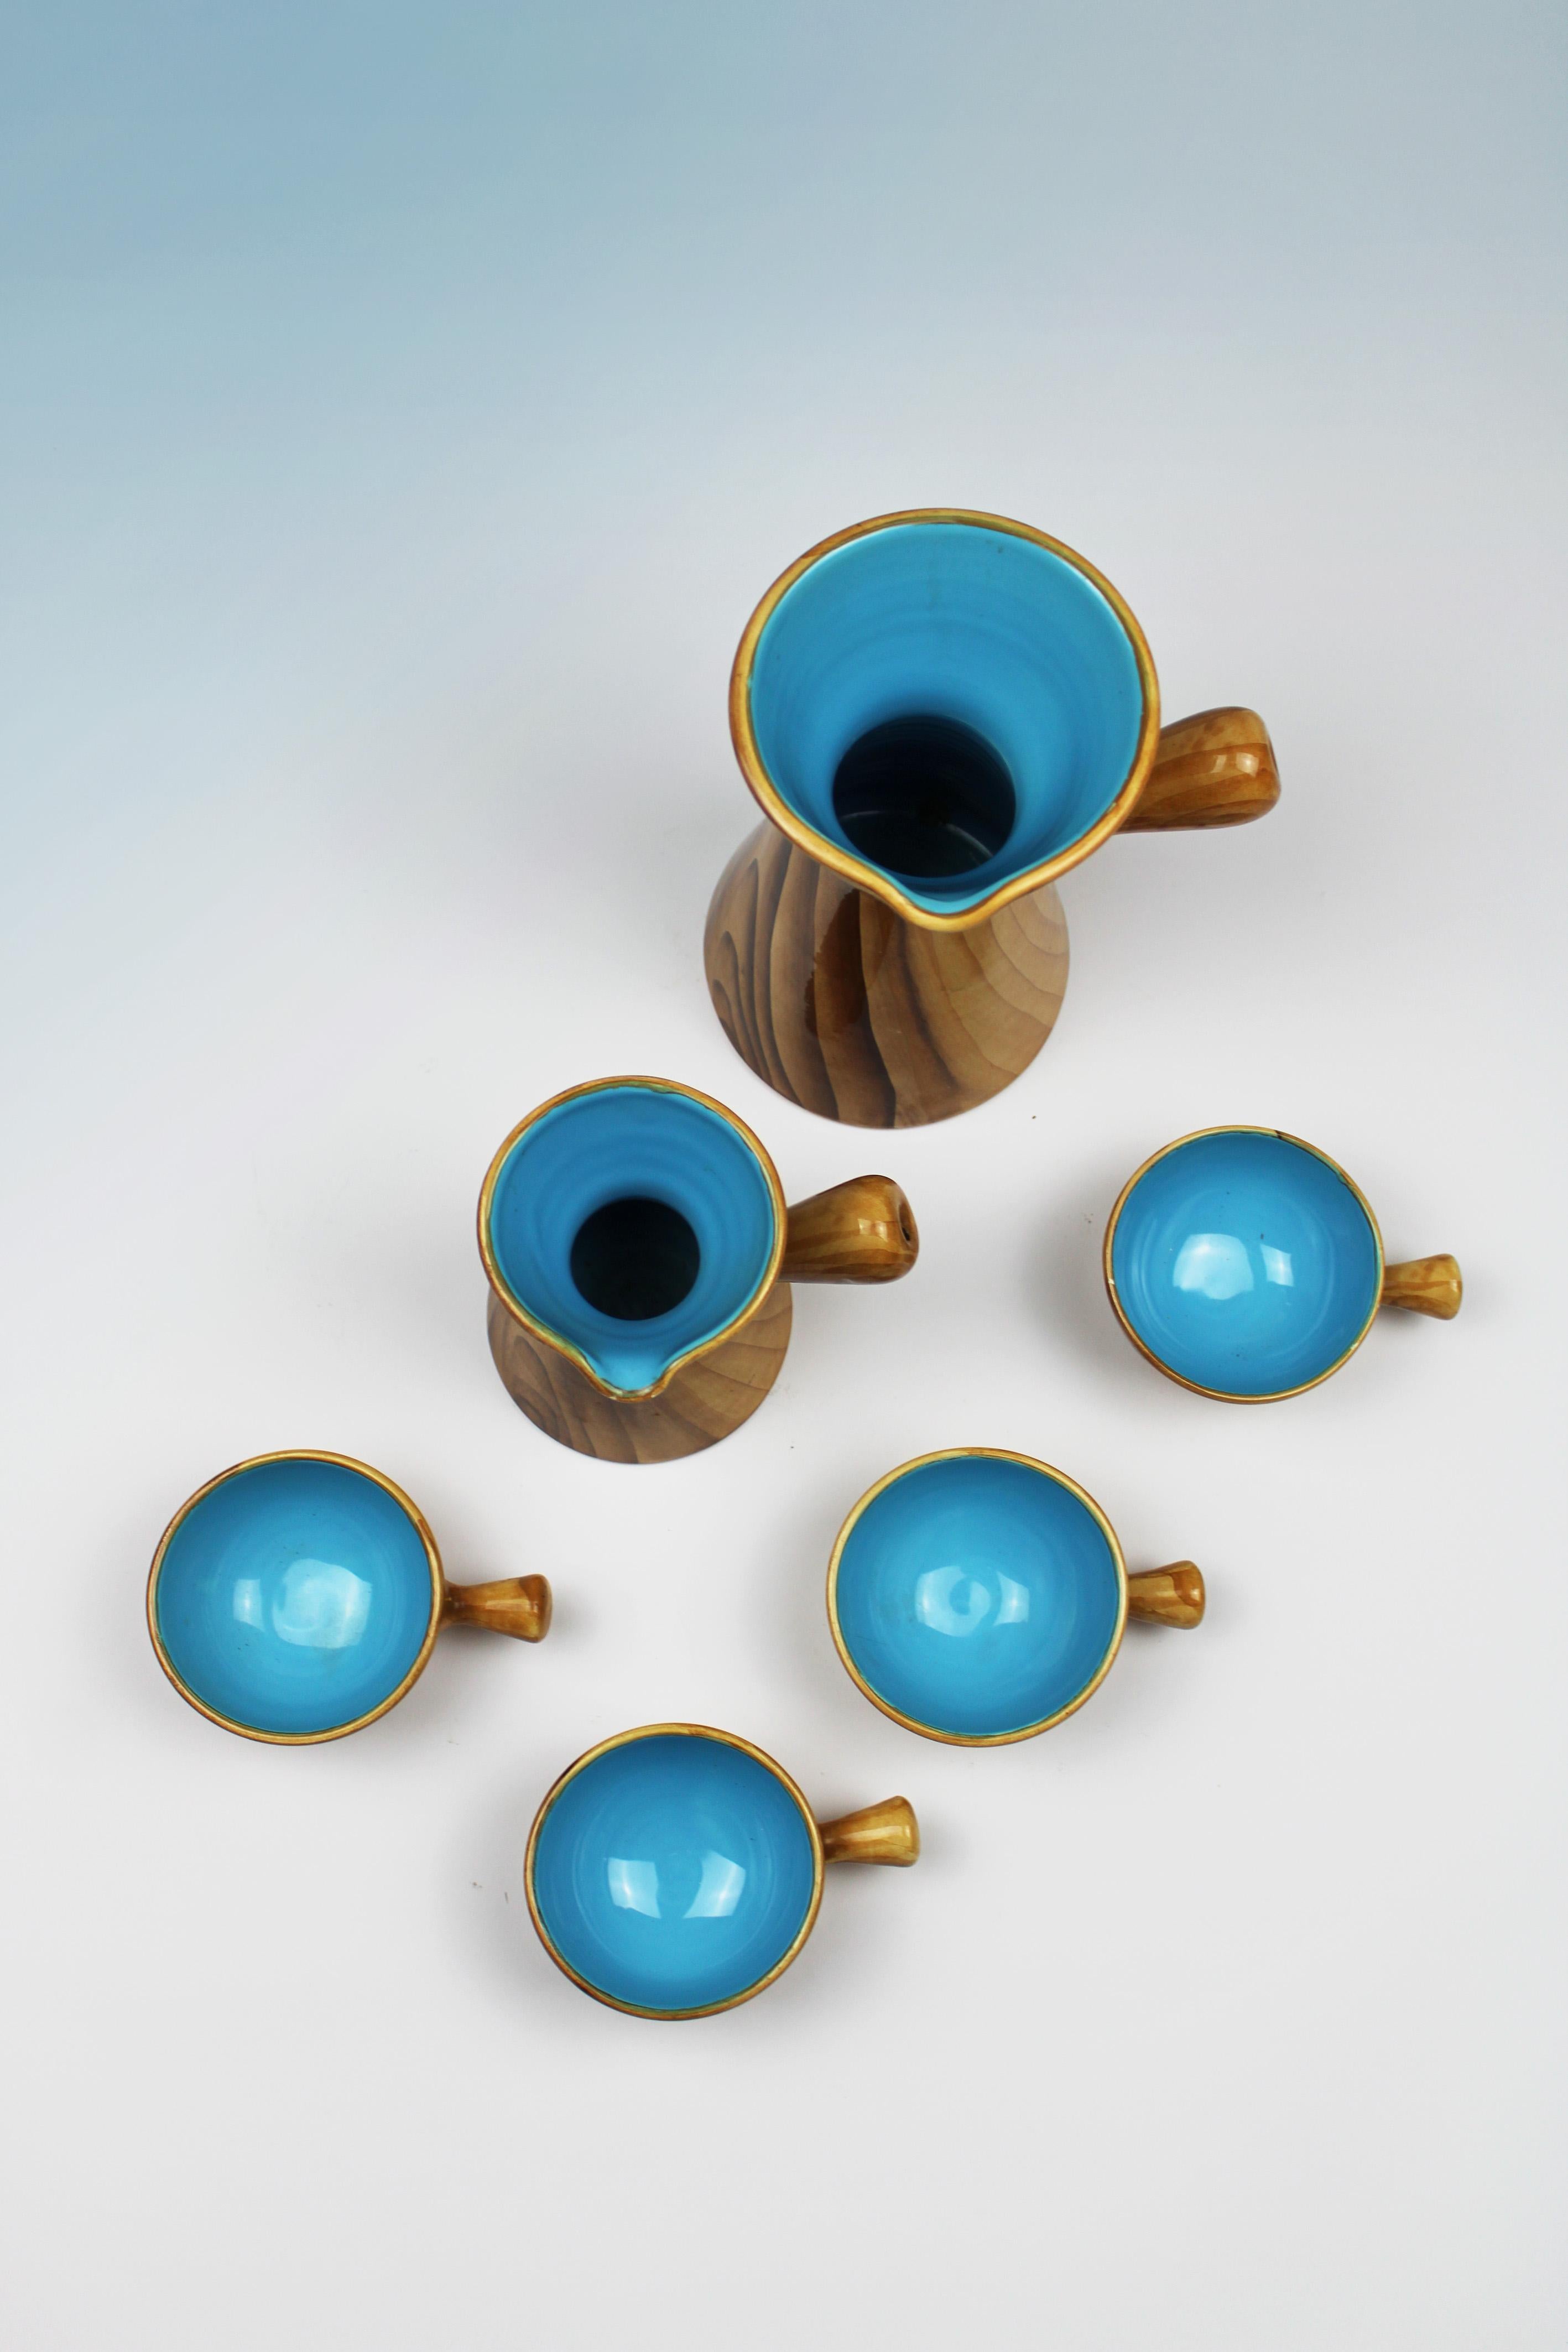 Introducing the timeless elegance of the Faux Bois Mug & Cups, designed by the visionary Grandjean Jourdan and meticulously crafted by Vallauris Ceramics in France during the 1960s. These exquisite pieces showcase the epitome of mid-century design,